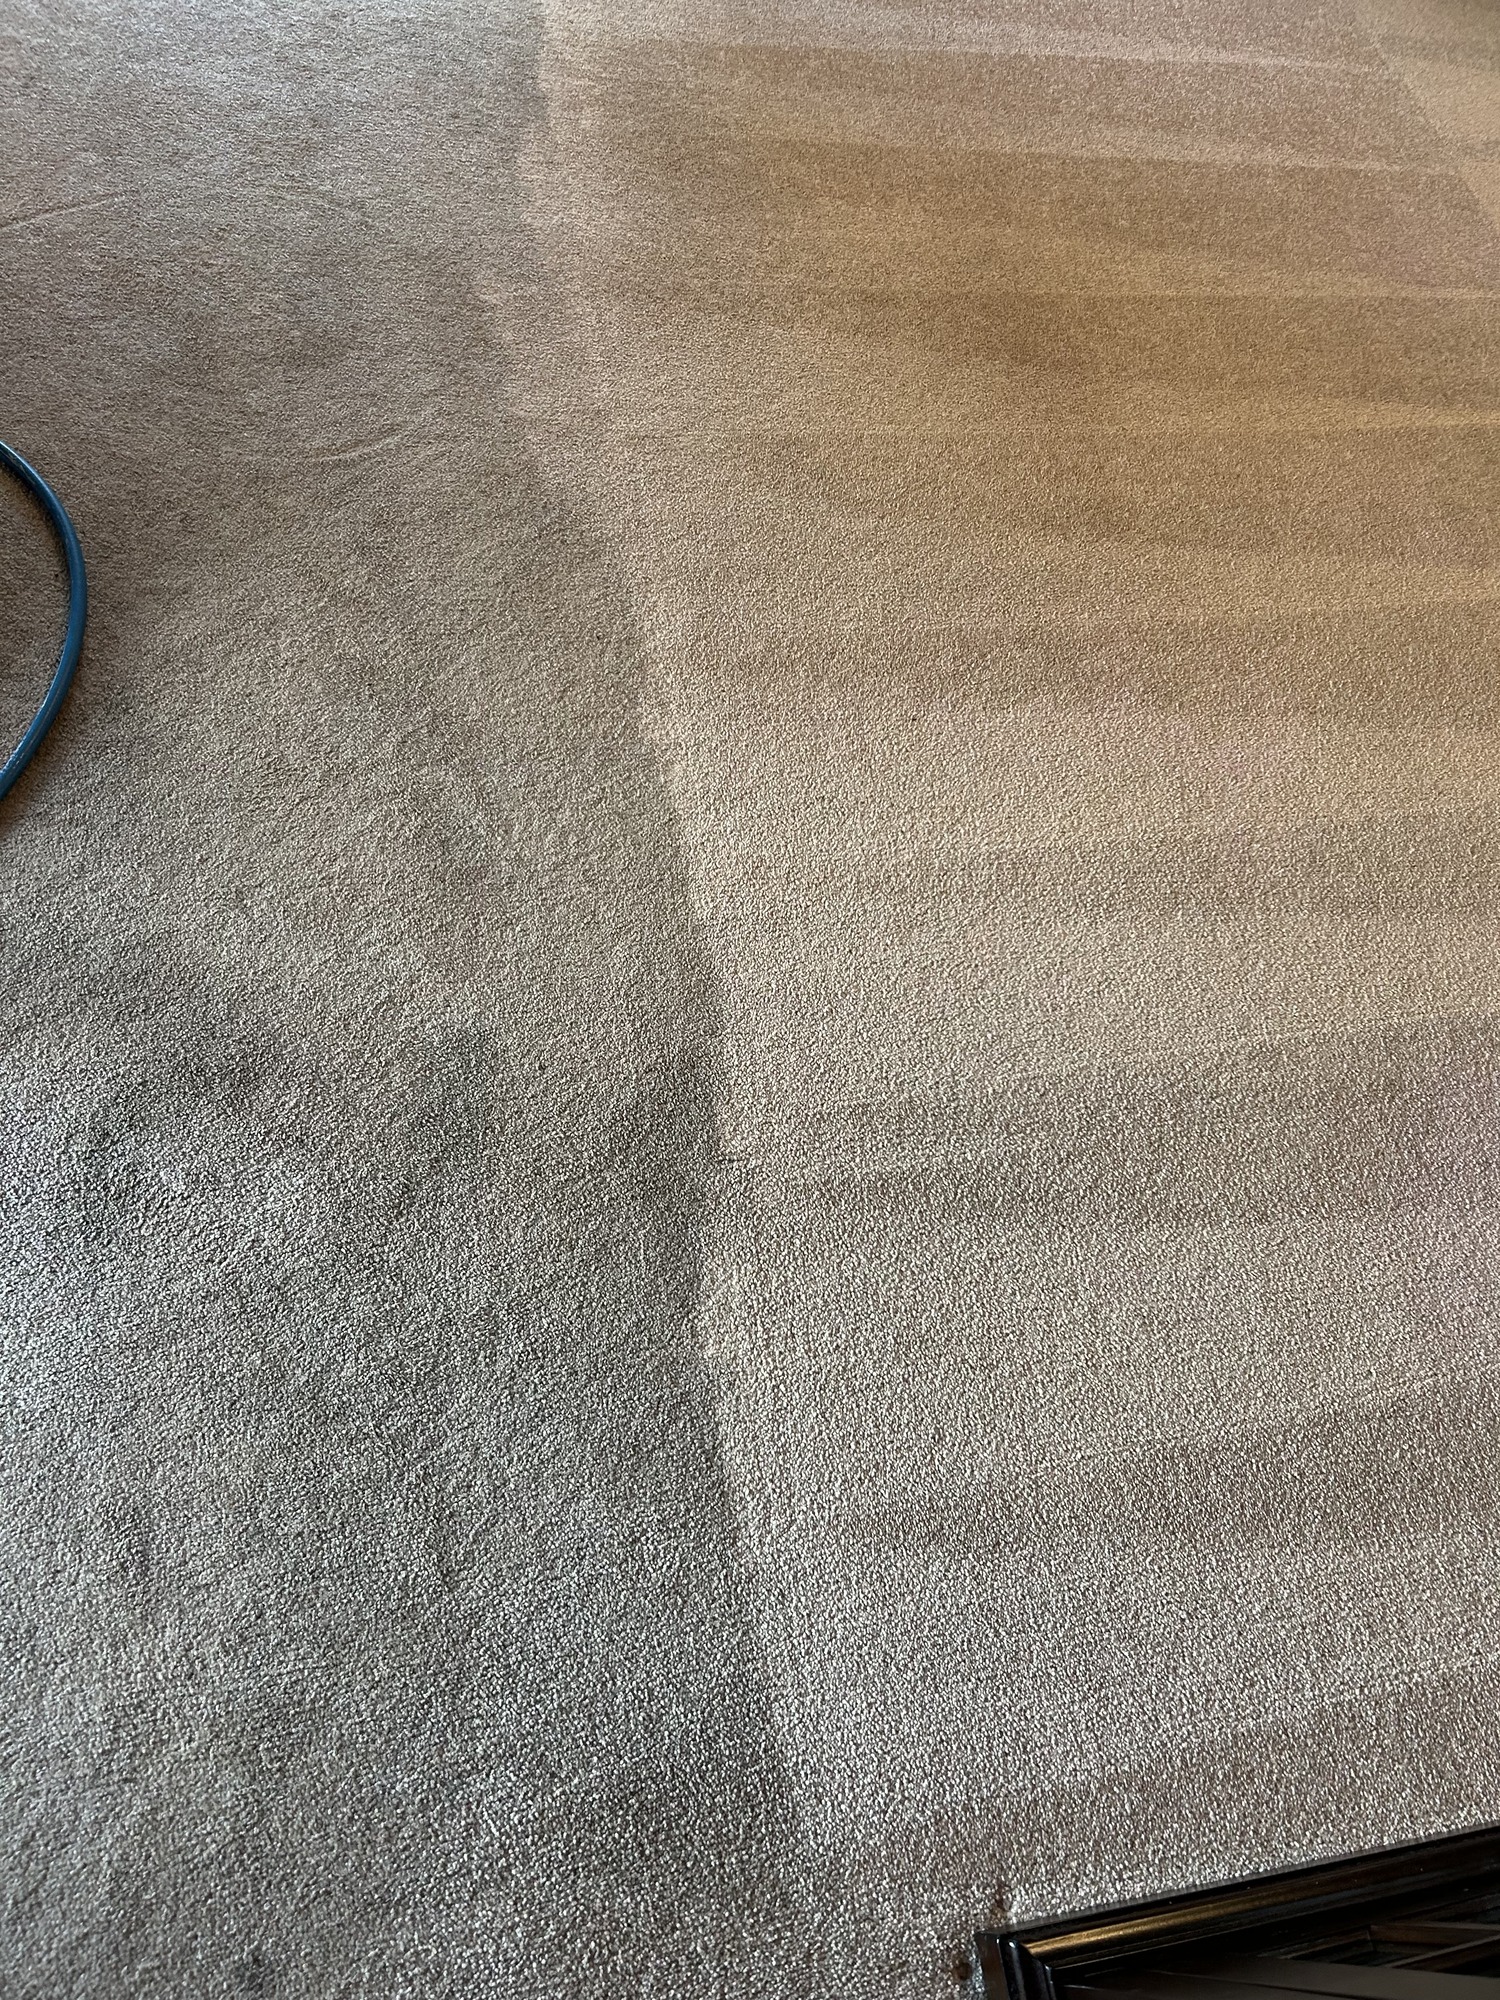 picture of clean carpet